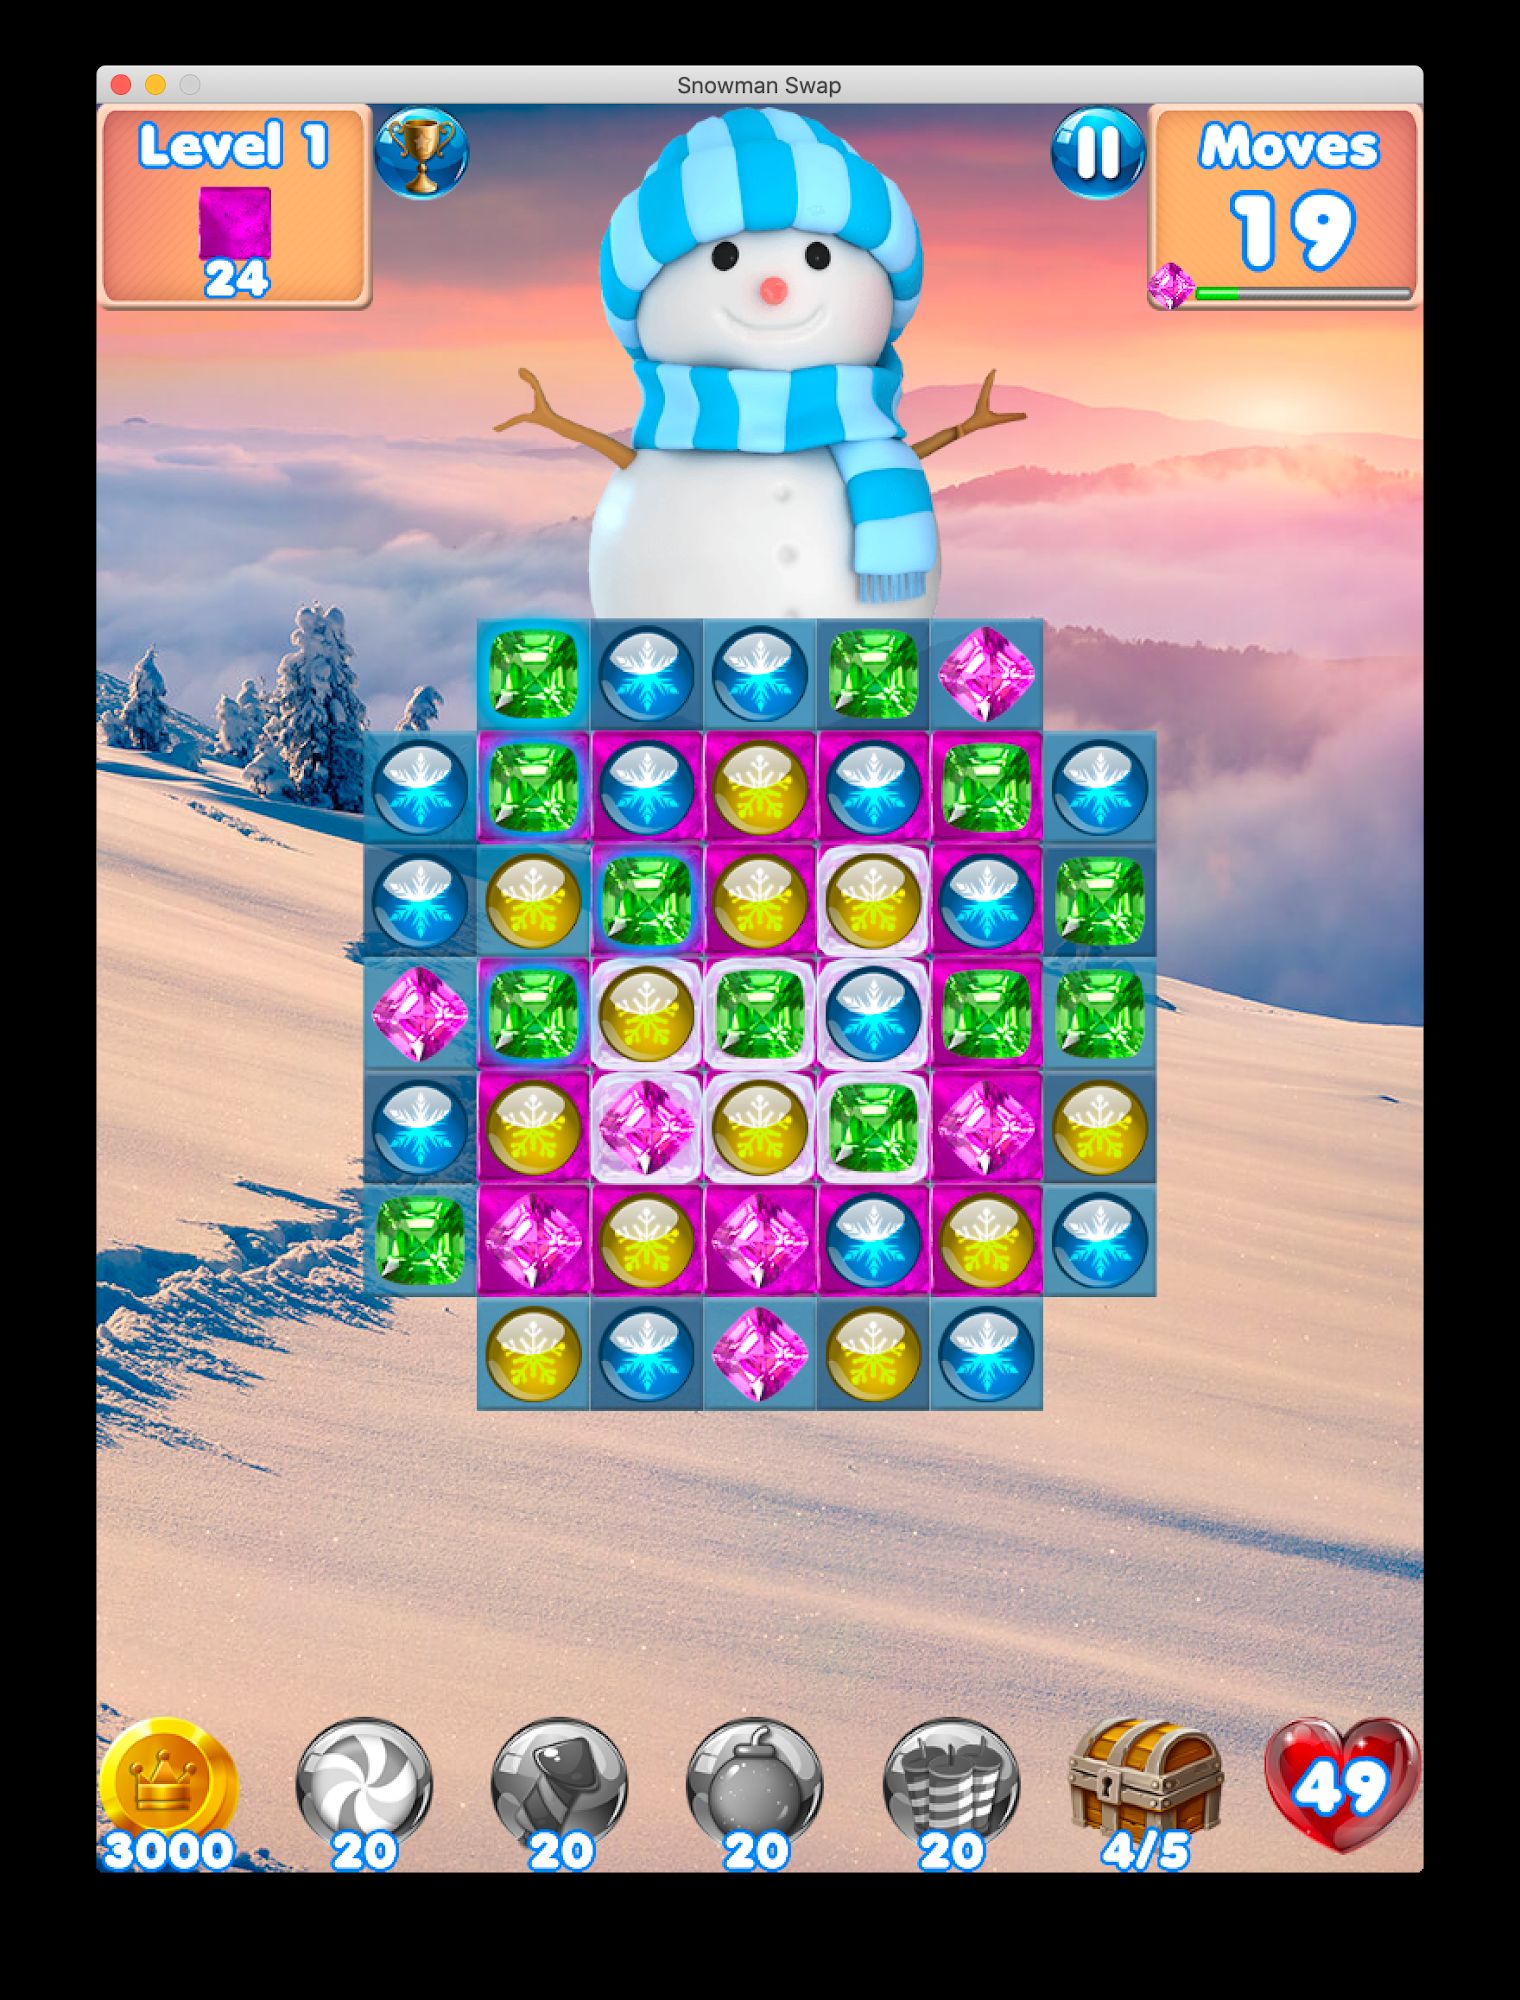 Scarica Snowman Swap - match 3 games and Christmas Games gratis per Android.